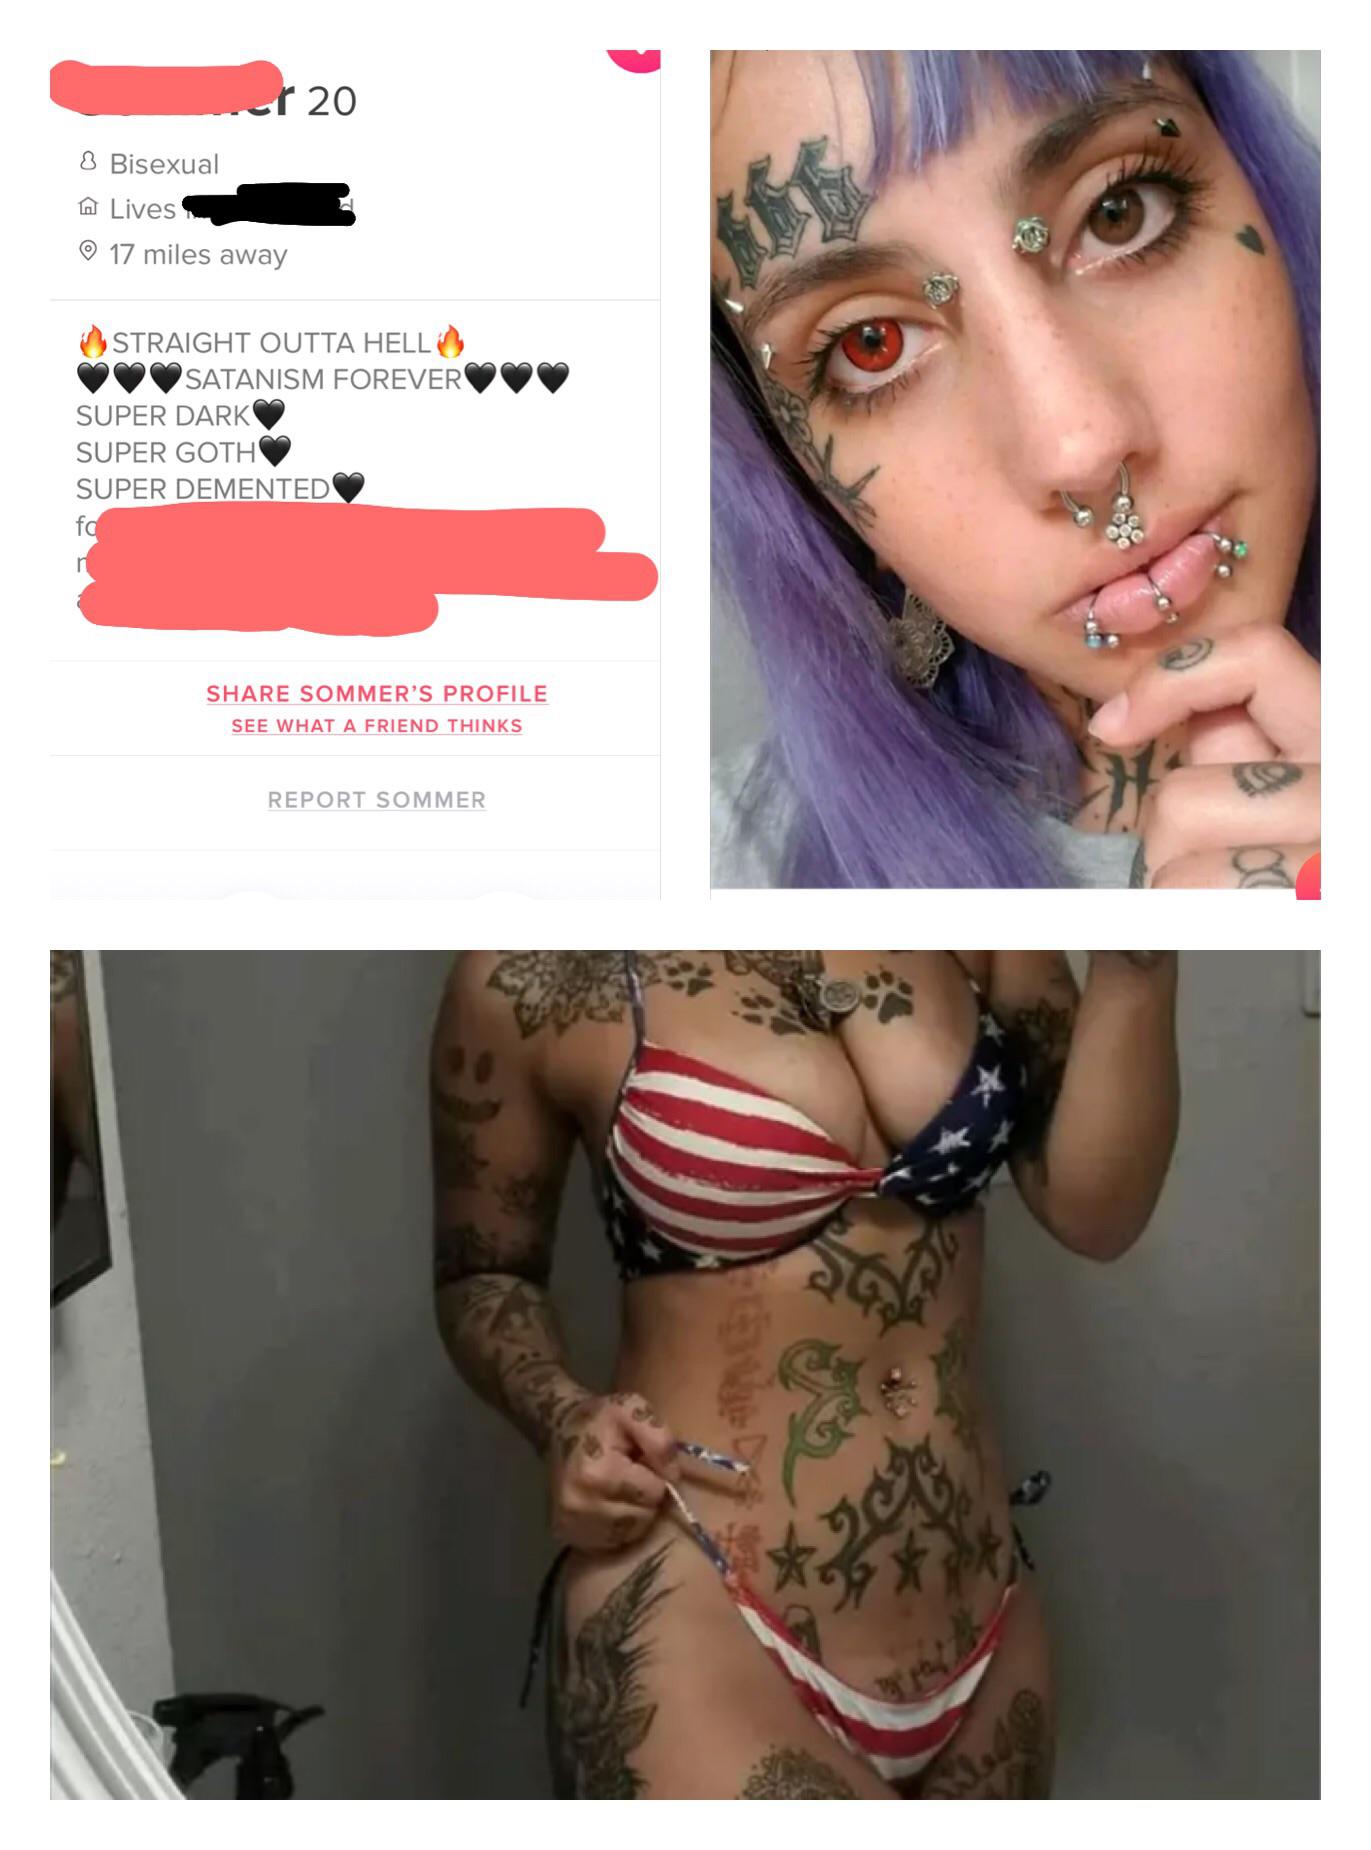 shameless tinder - Bisexual A Lives 17 miles away Straight Outta Hell Satanism Forever Super Dark Super Goth Super Demented Sommer'S Profile See What A Friend Thinks Report Sommer